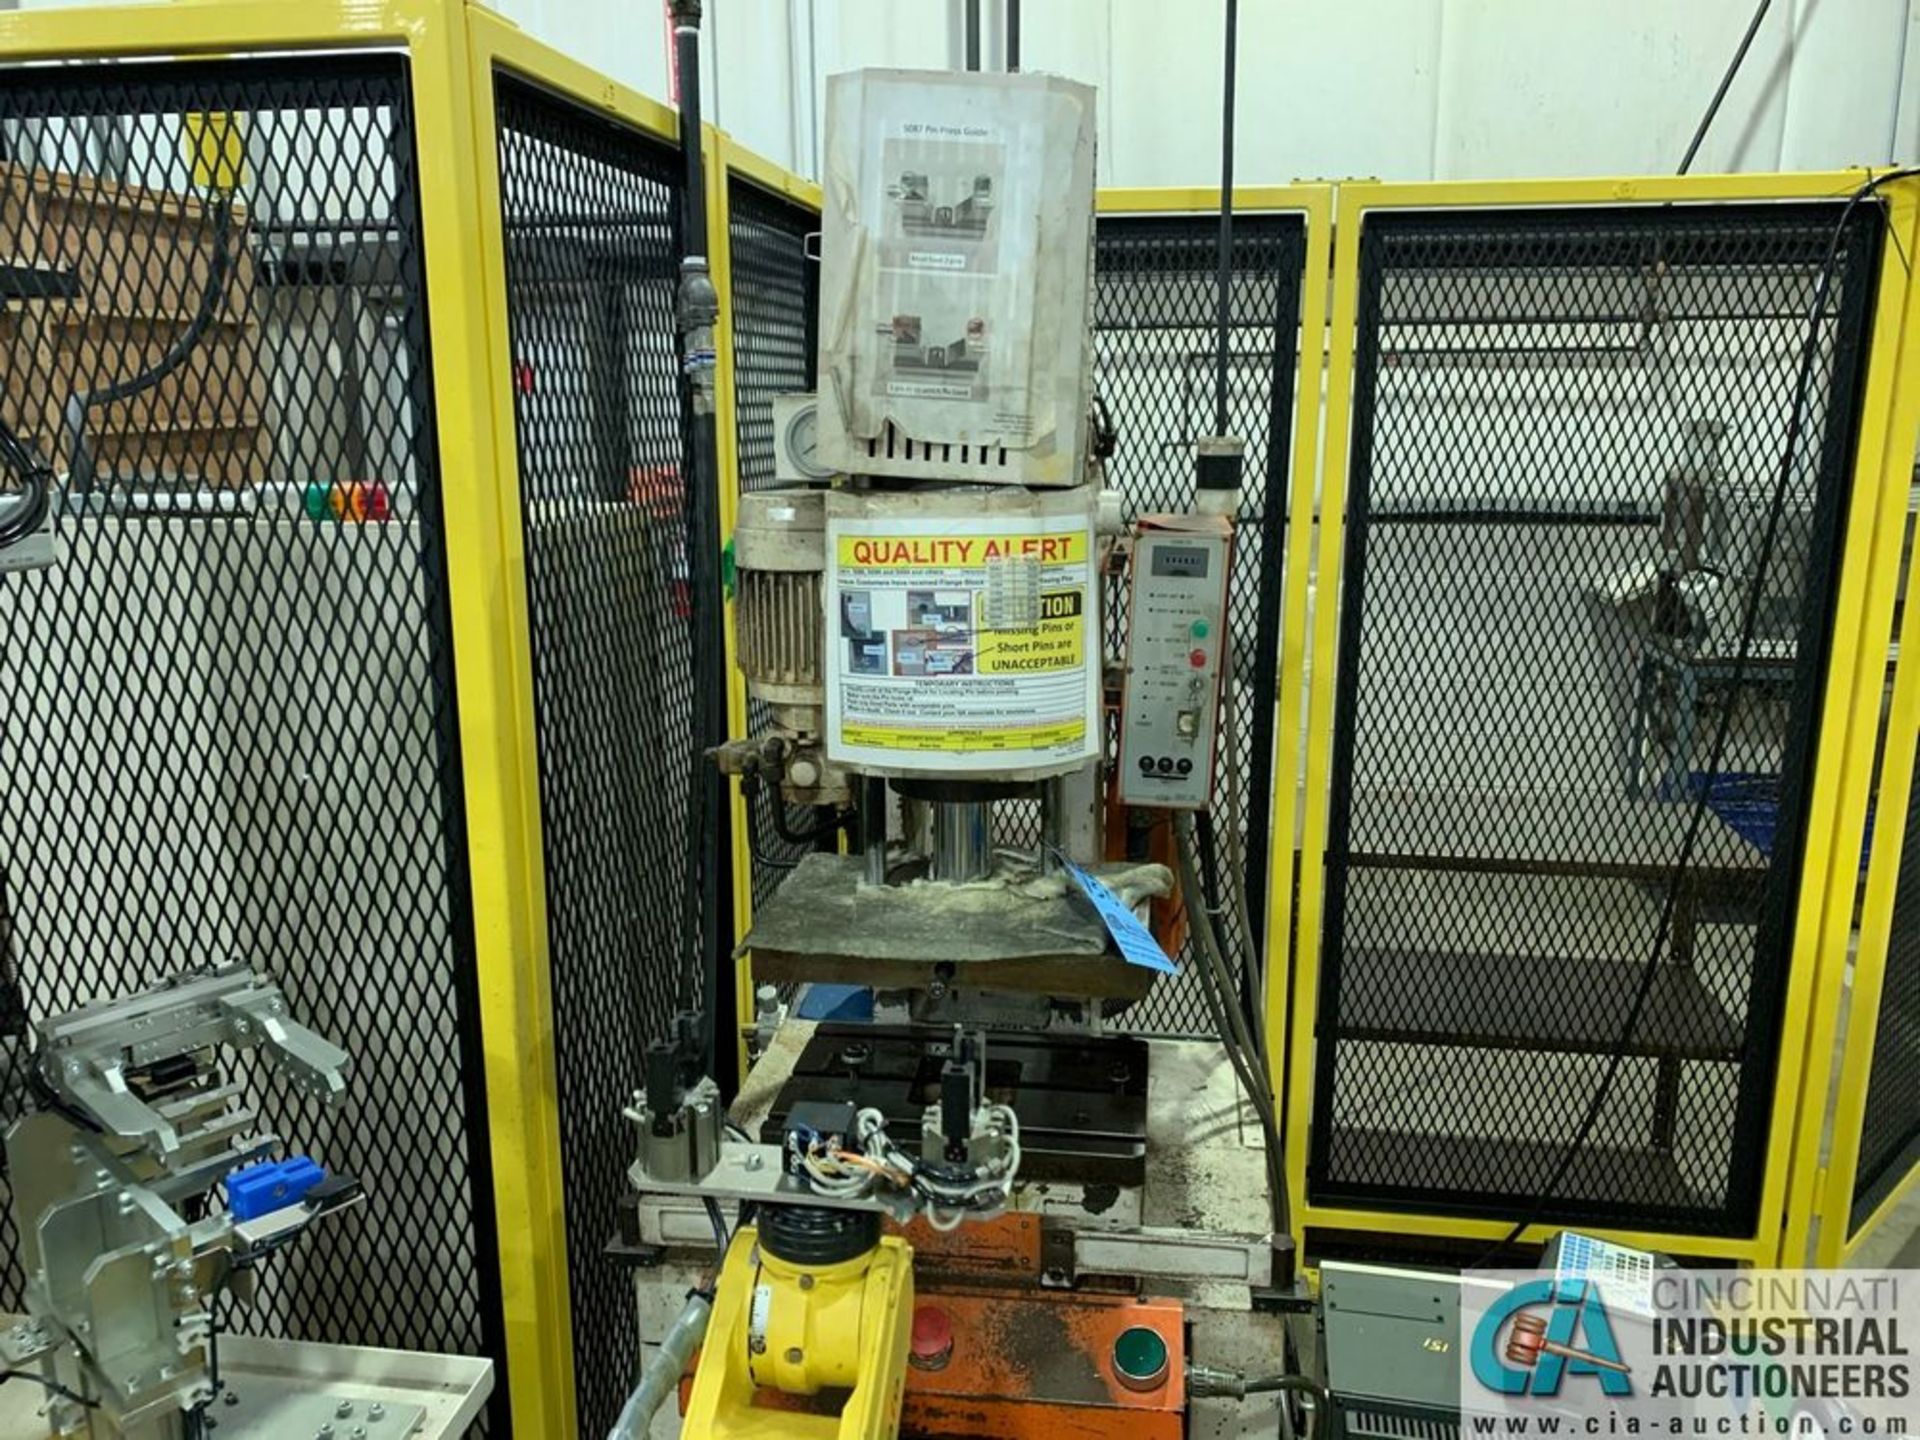 OVERALL LOTS 150-154; ROBOT PRESS CELL **Loading fee due Griner Eng $600.00 price valid until 3/19** - Image 5 of 12